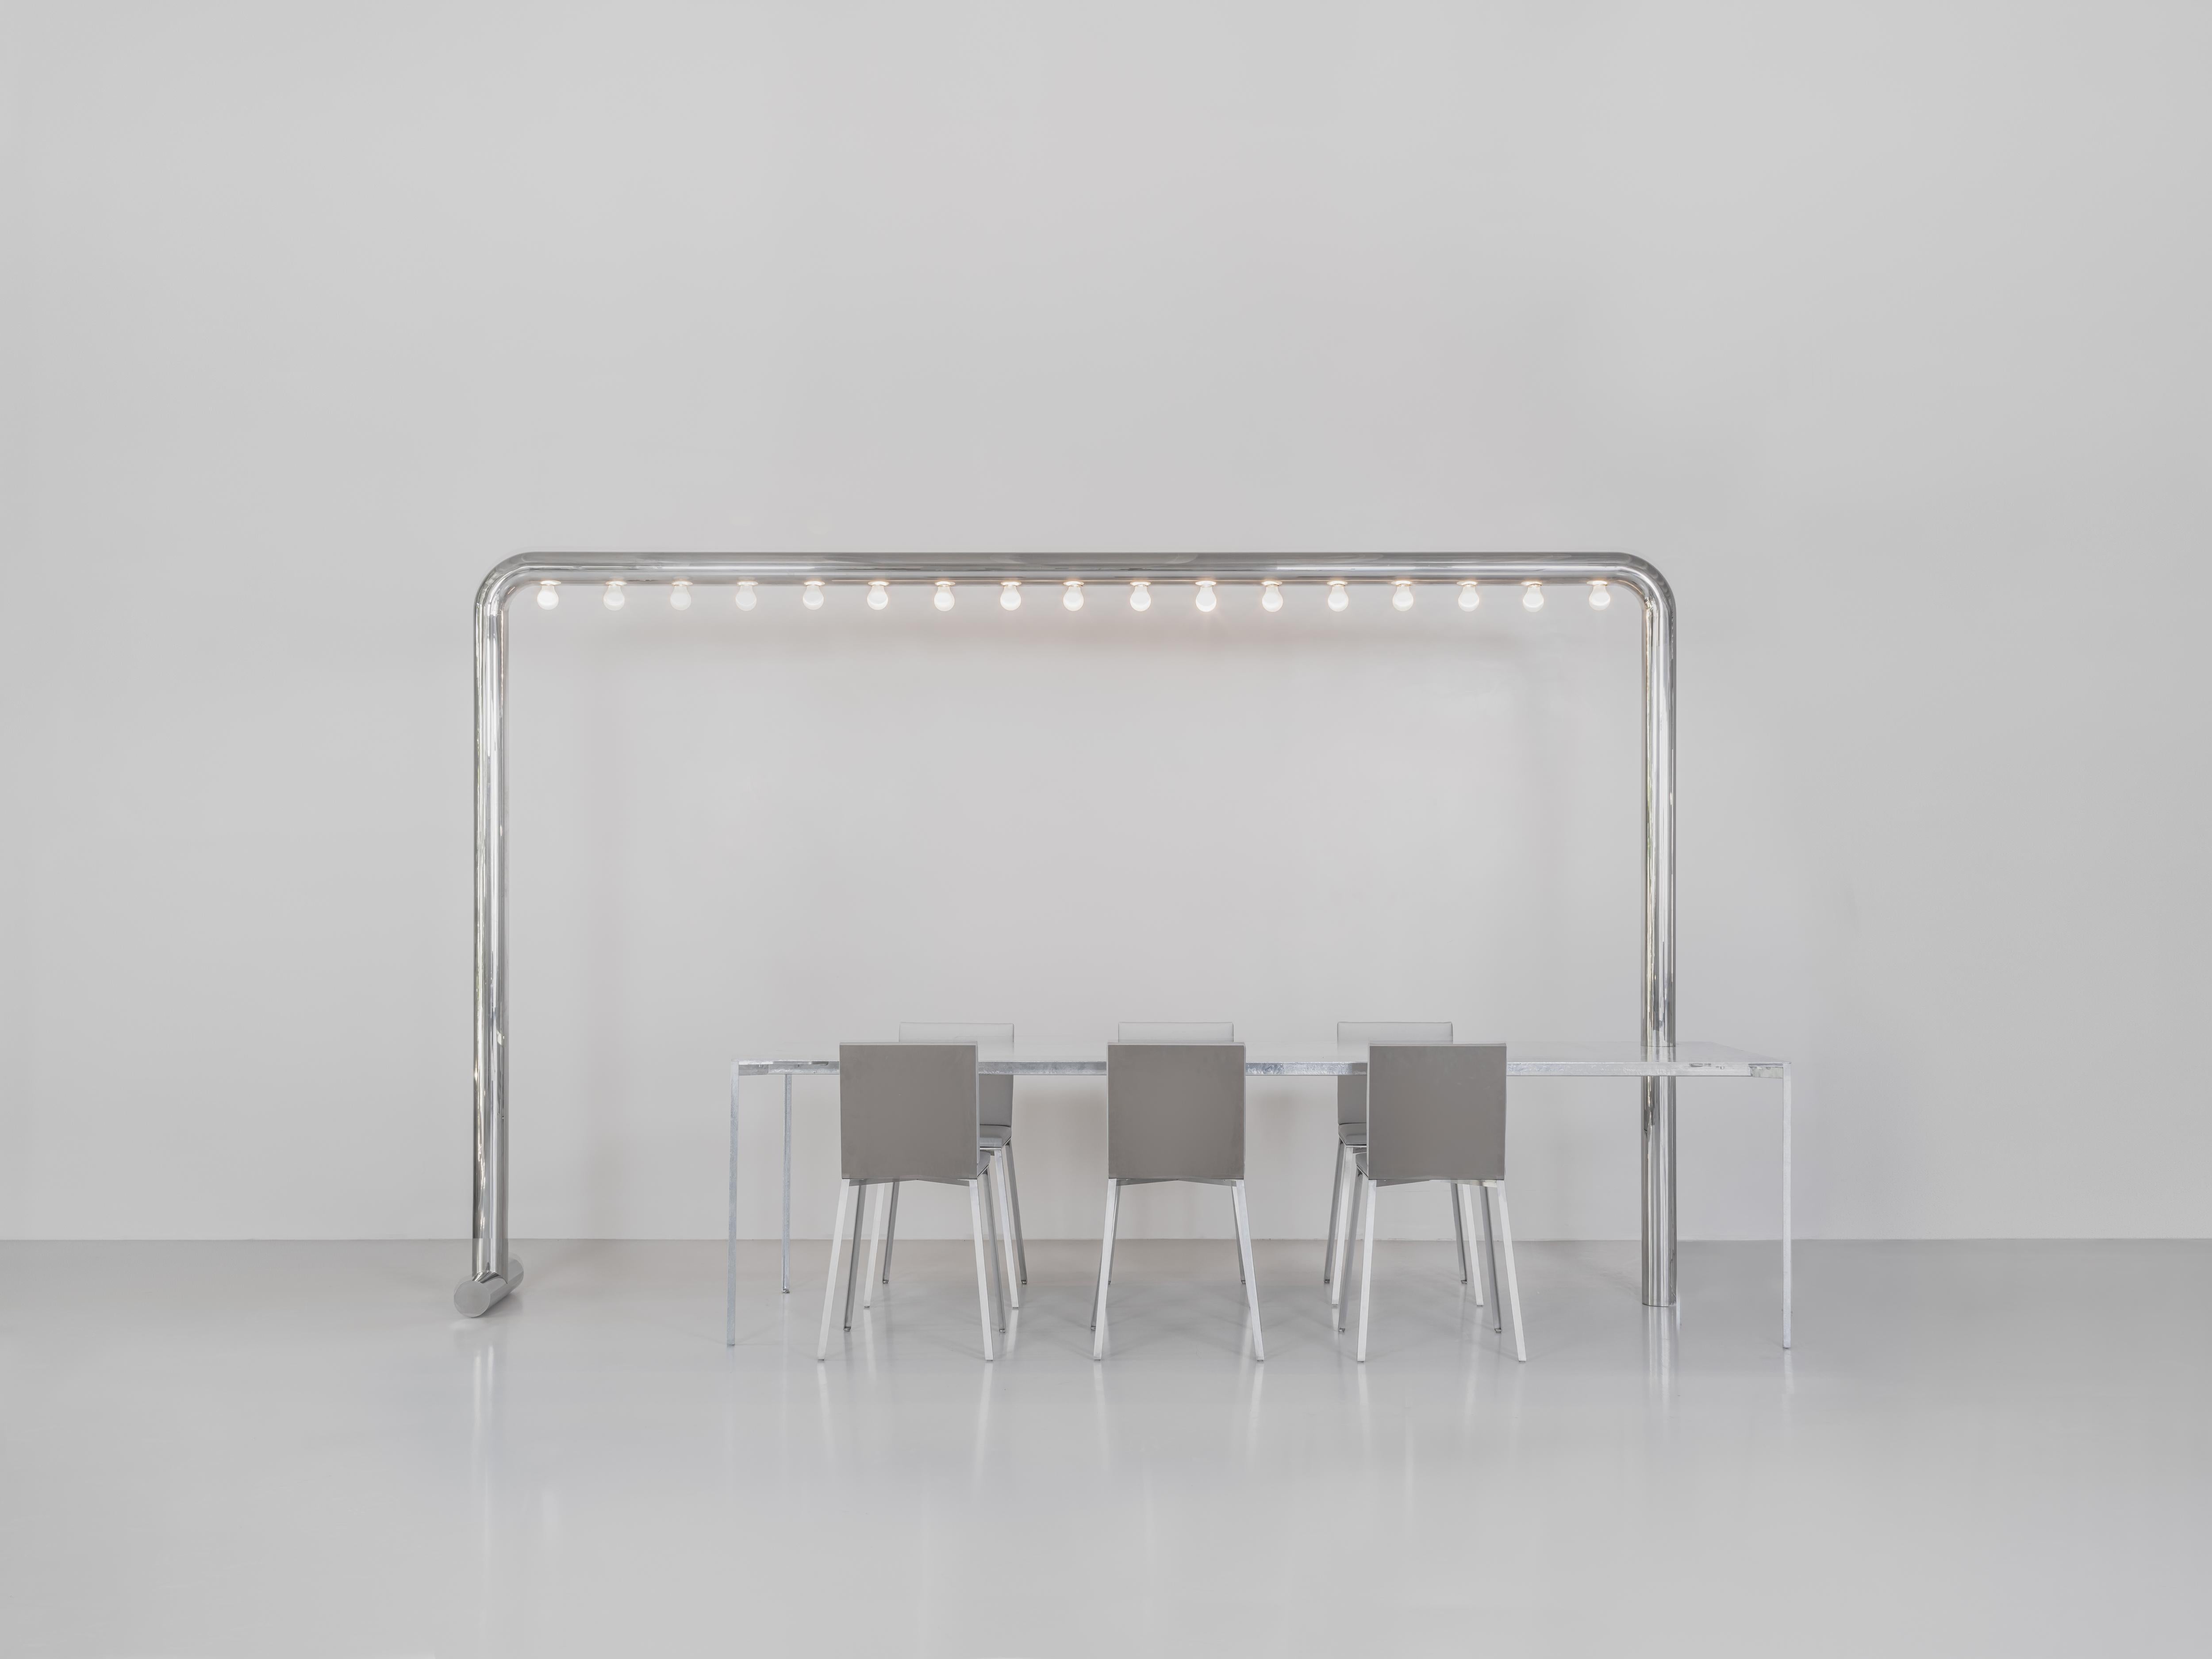 Sam Chermayeff
Dining table
From the series “Beasts”
Produced in exclusive for SIDE GALLERY
Manufactured by ERTL und ZULL
Berlin, 2021
Galvanized steel, high polished steel
Contemporary Design

Measurements
358 cm x 80 cm x 220h cm (74,5